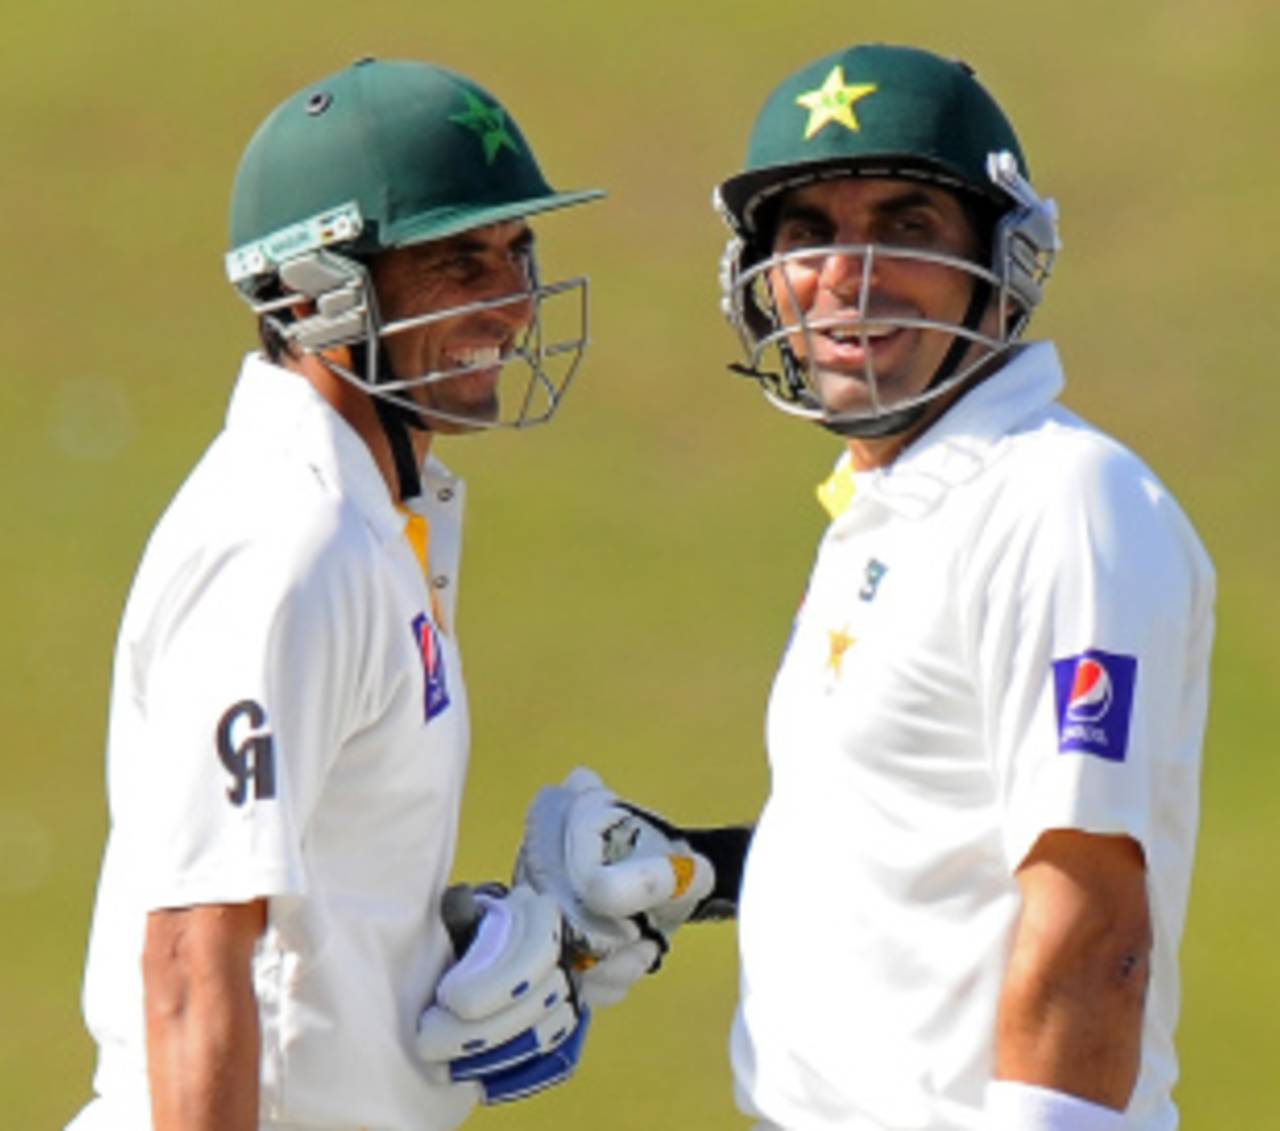 Their 218-run stand on the second day was the third instance of Younis Khan and Misbah-ul-Haq adding more than 100 runs together against Sri Lanka&nbsp;&nbsp;&bull;&nbsp;&nbsp;AFP